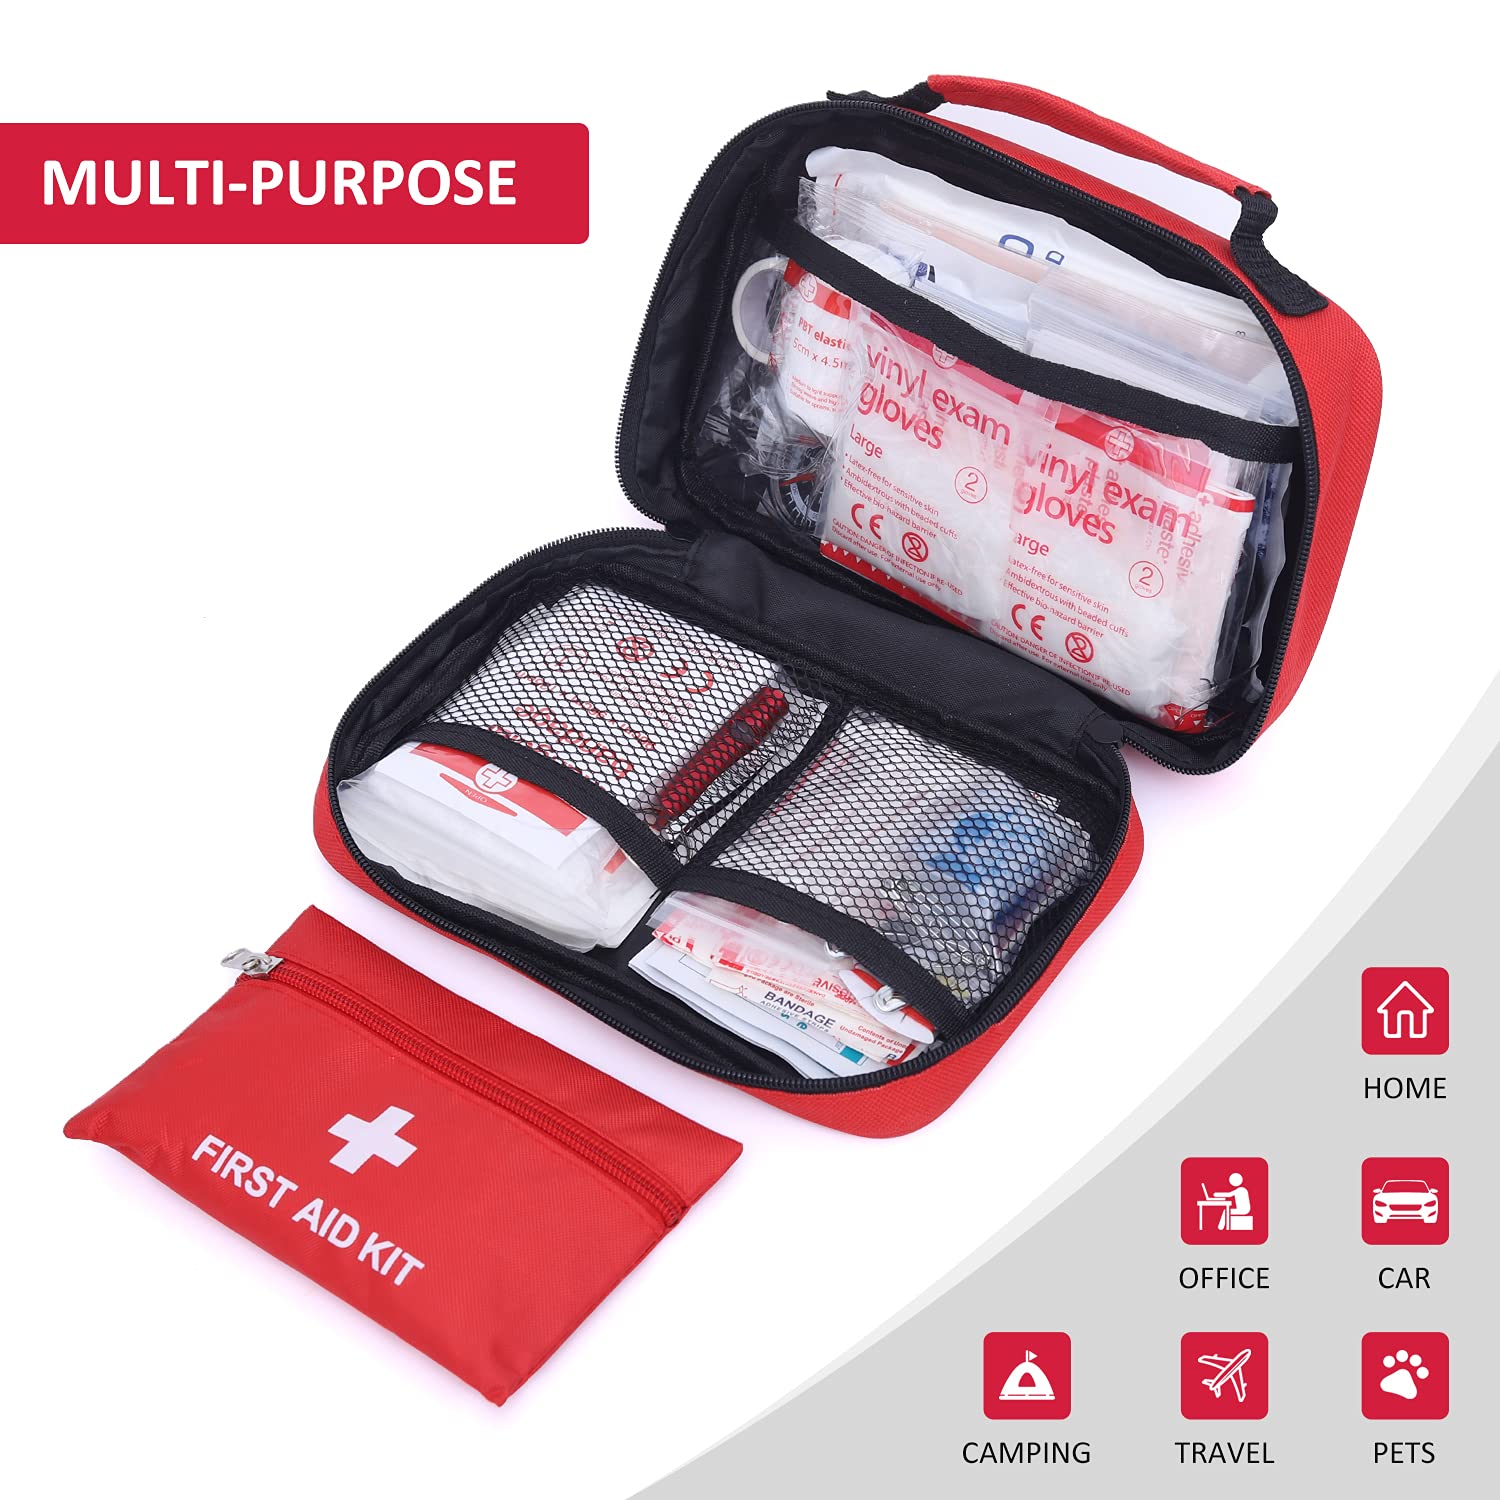 DAVEMED Travel First Aid Kit,230Pieces Car First Aid Kit,2-in-1 First Aid Kit+Extra Mini First Aid Kit for Home,Backpacking,Camping,Hiking,Hunting,Office,Sports & Outdoor